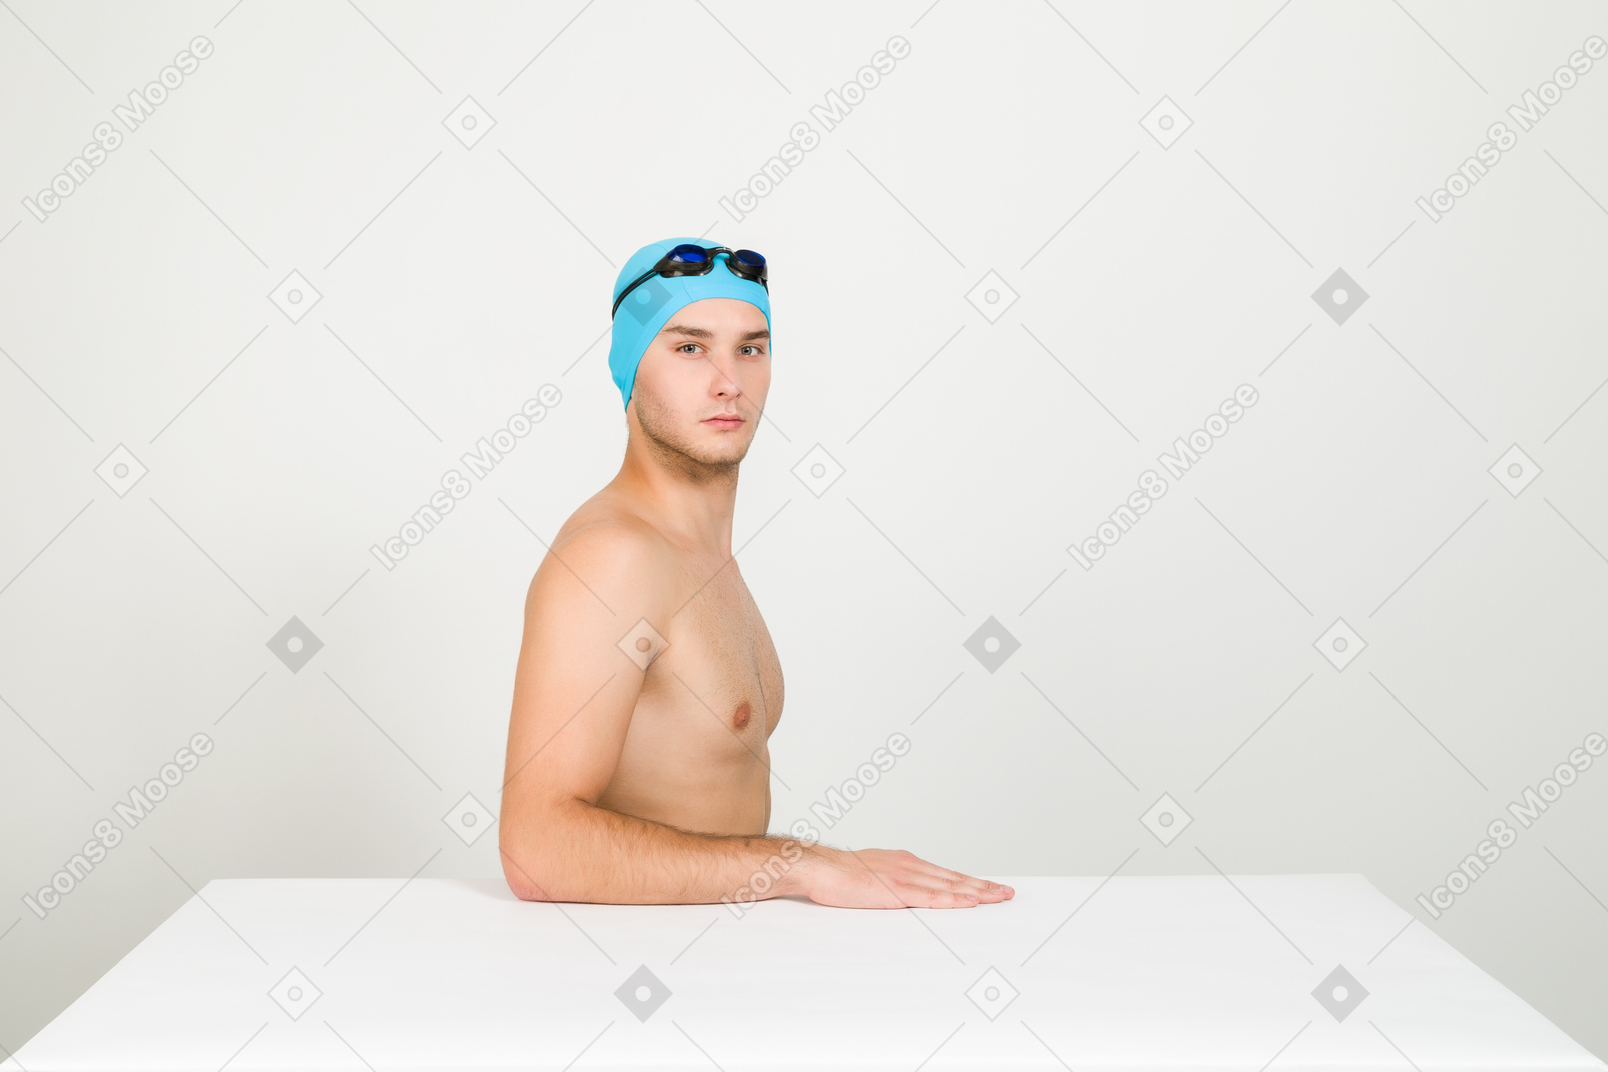 Bare chested swimmer sitting at the table in profile